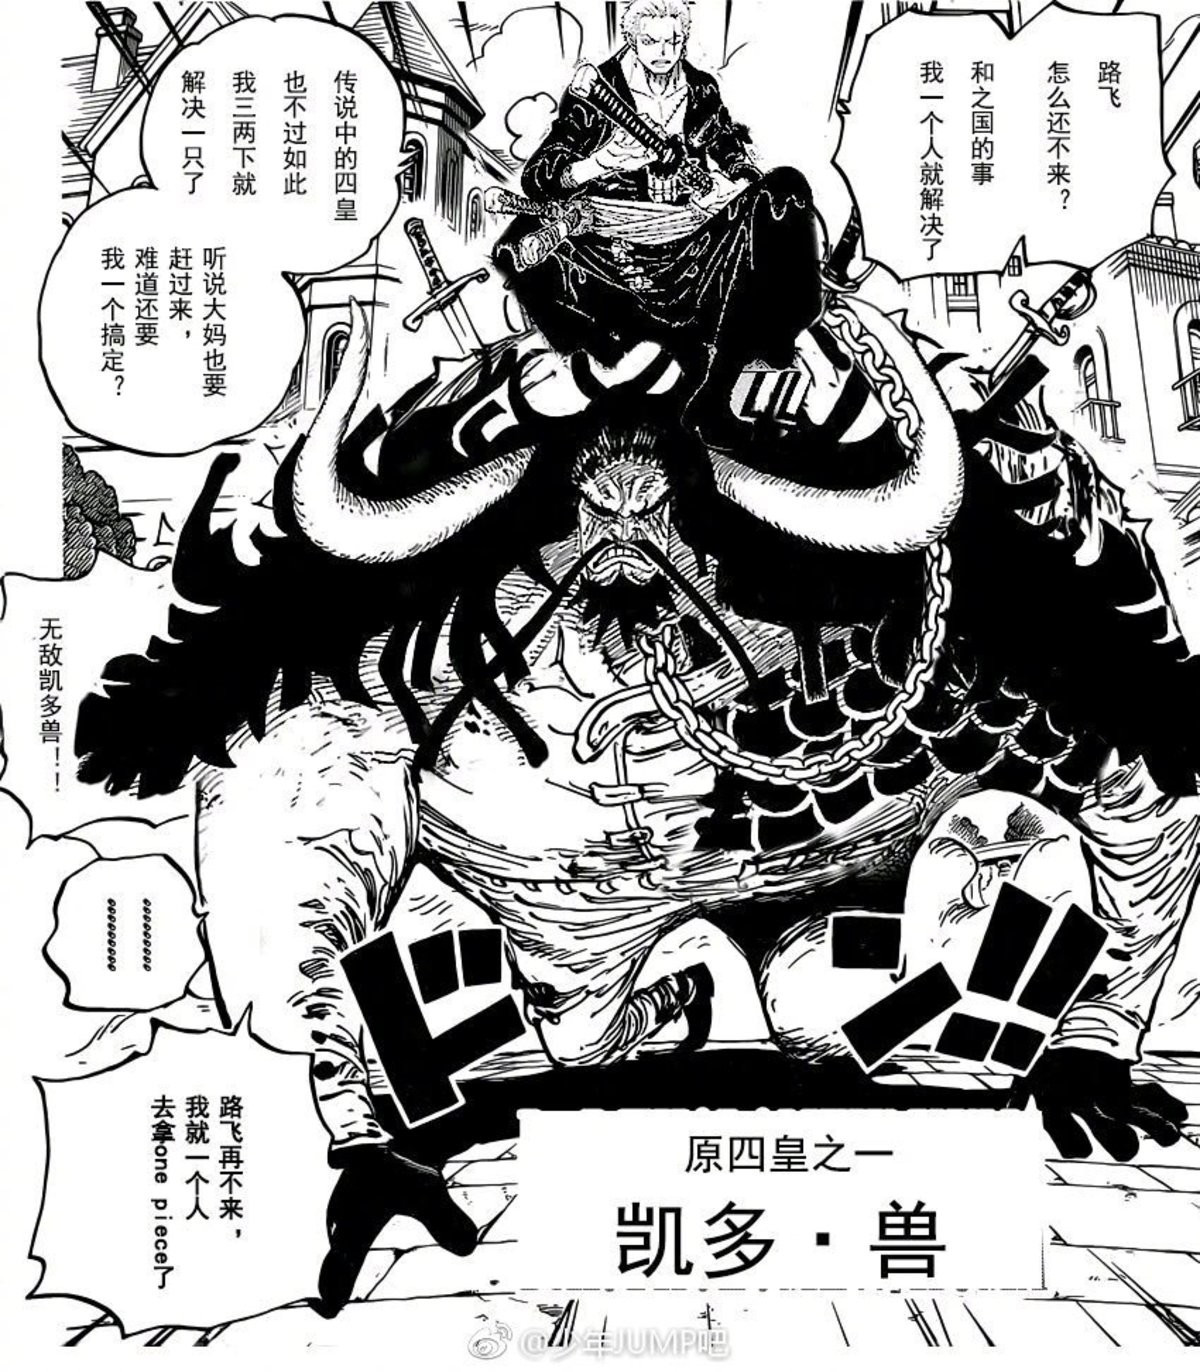 Spoiler One Piece Chapter 993 Spoilers Discussion Page 33 Worstgen